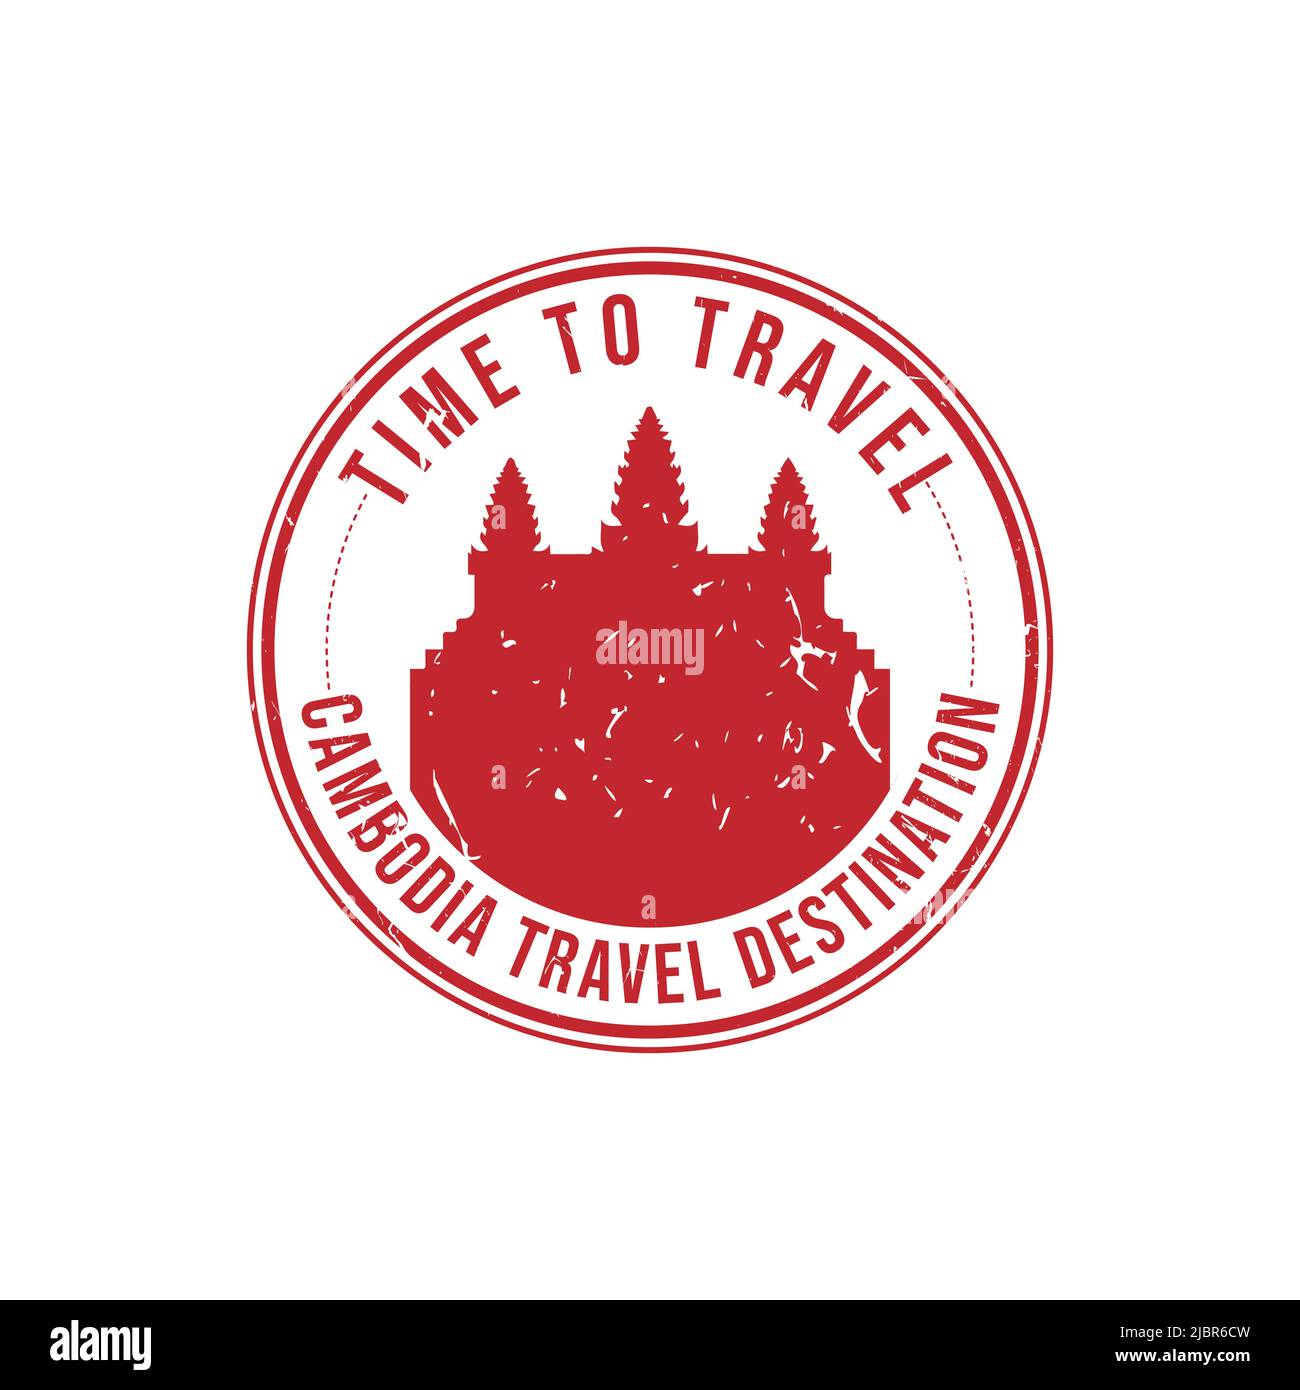 Grunge rubber stamp with the text Cambodia travel destination written inside the stamp. Time to travel. Silhouette of ANGKOR WAT temple Cambodia histo Stock Vector